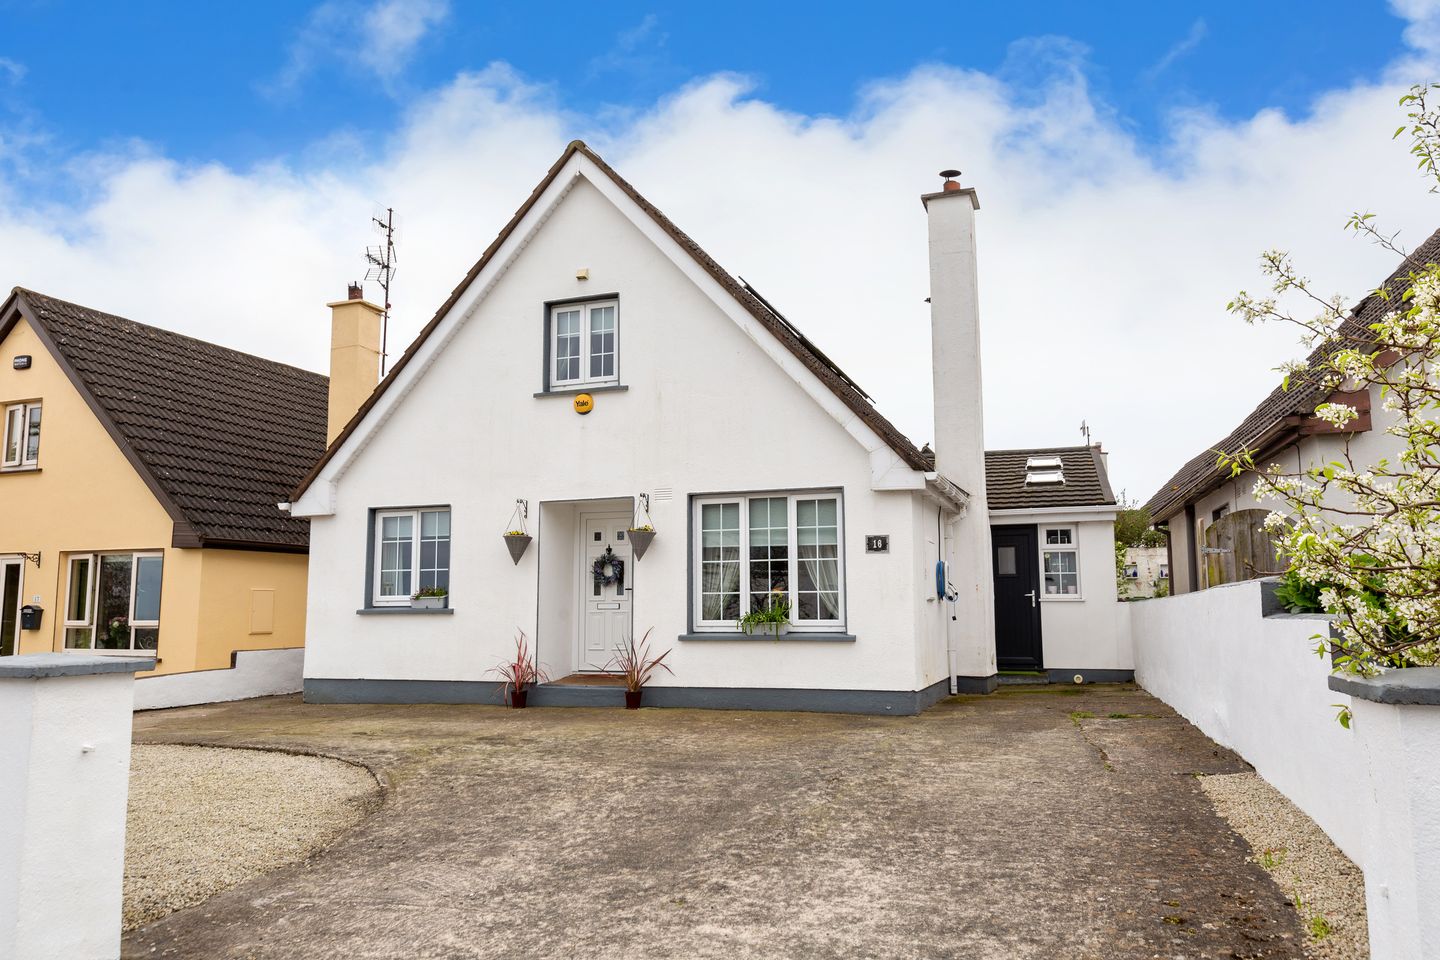 16 Avonbeg Drive, Harbour View, Wicklow Town, Co. Wicklow, A67YH30